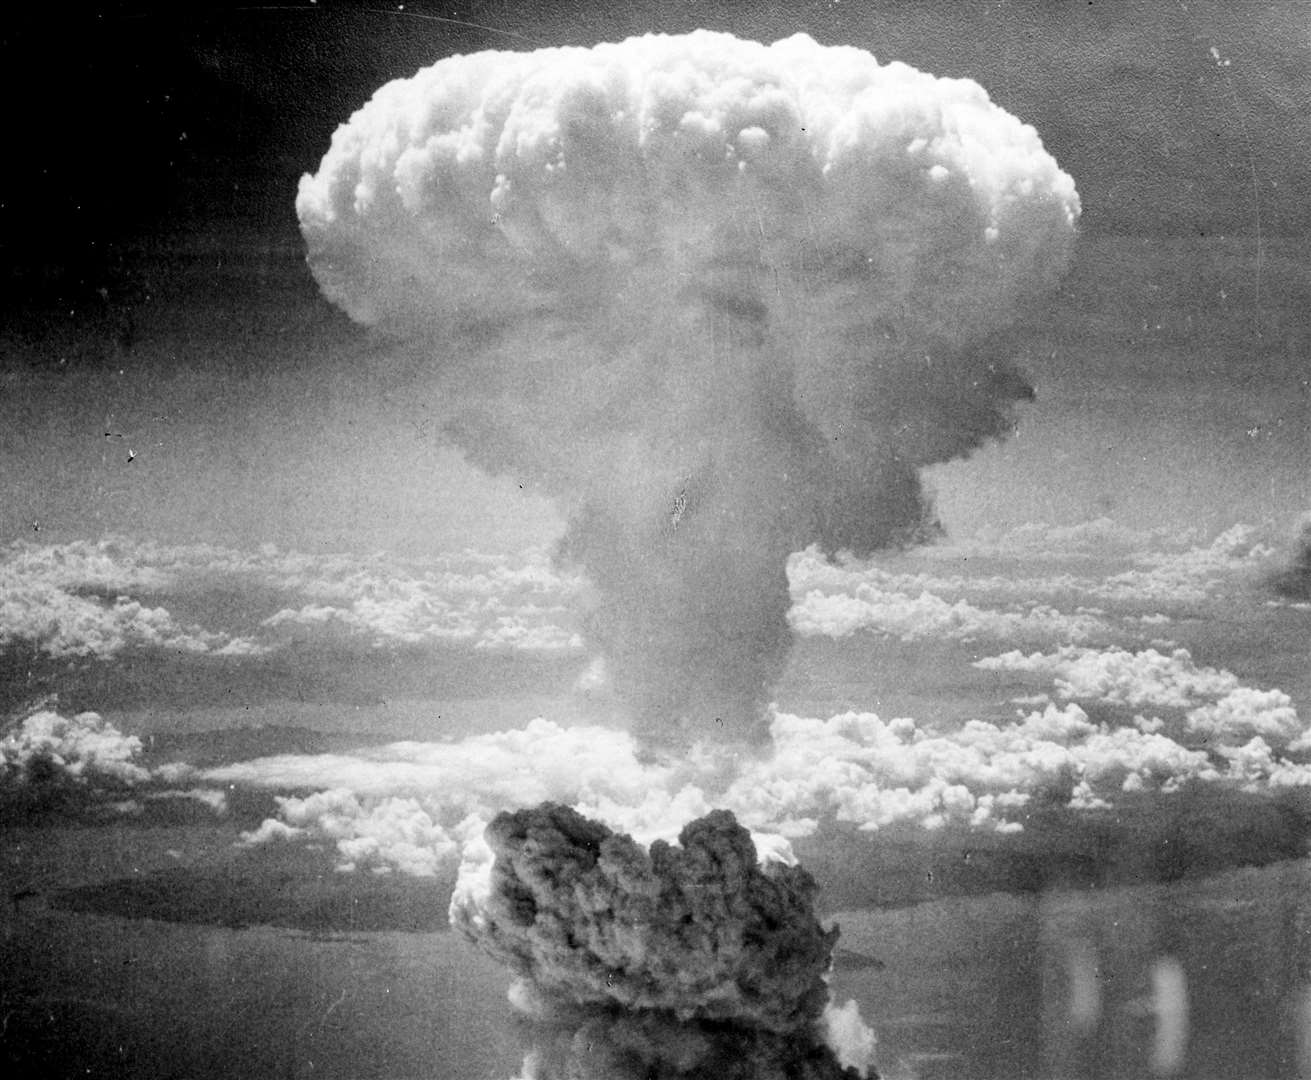 The atomic bombs dropped on Hiroshima and Nagasaki sparked a decades-long arms race. Picture: Wikimedia